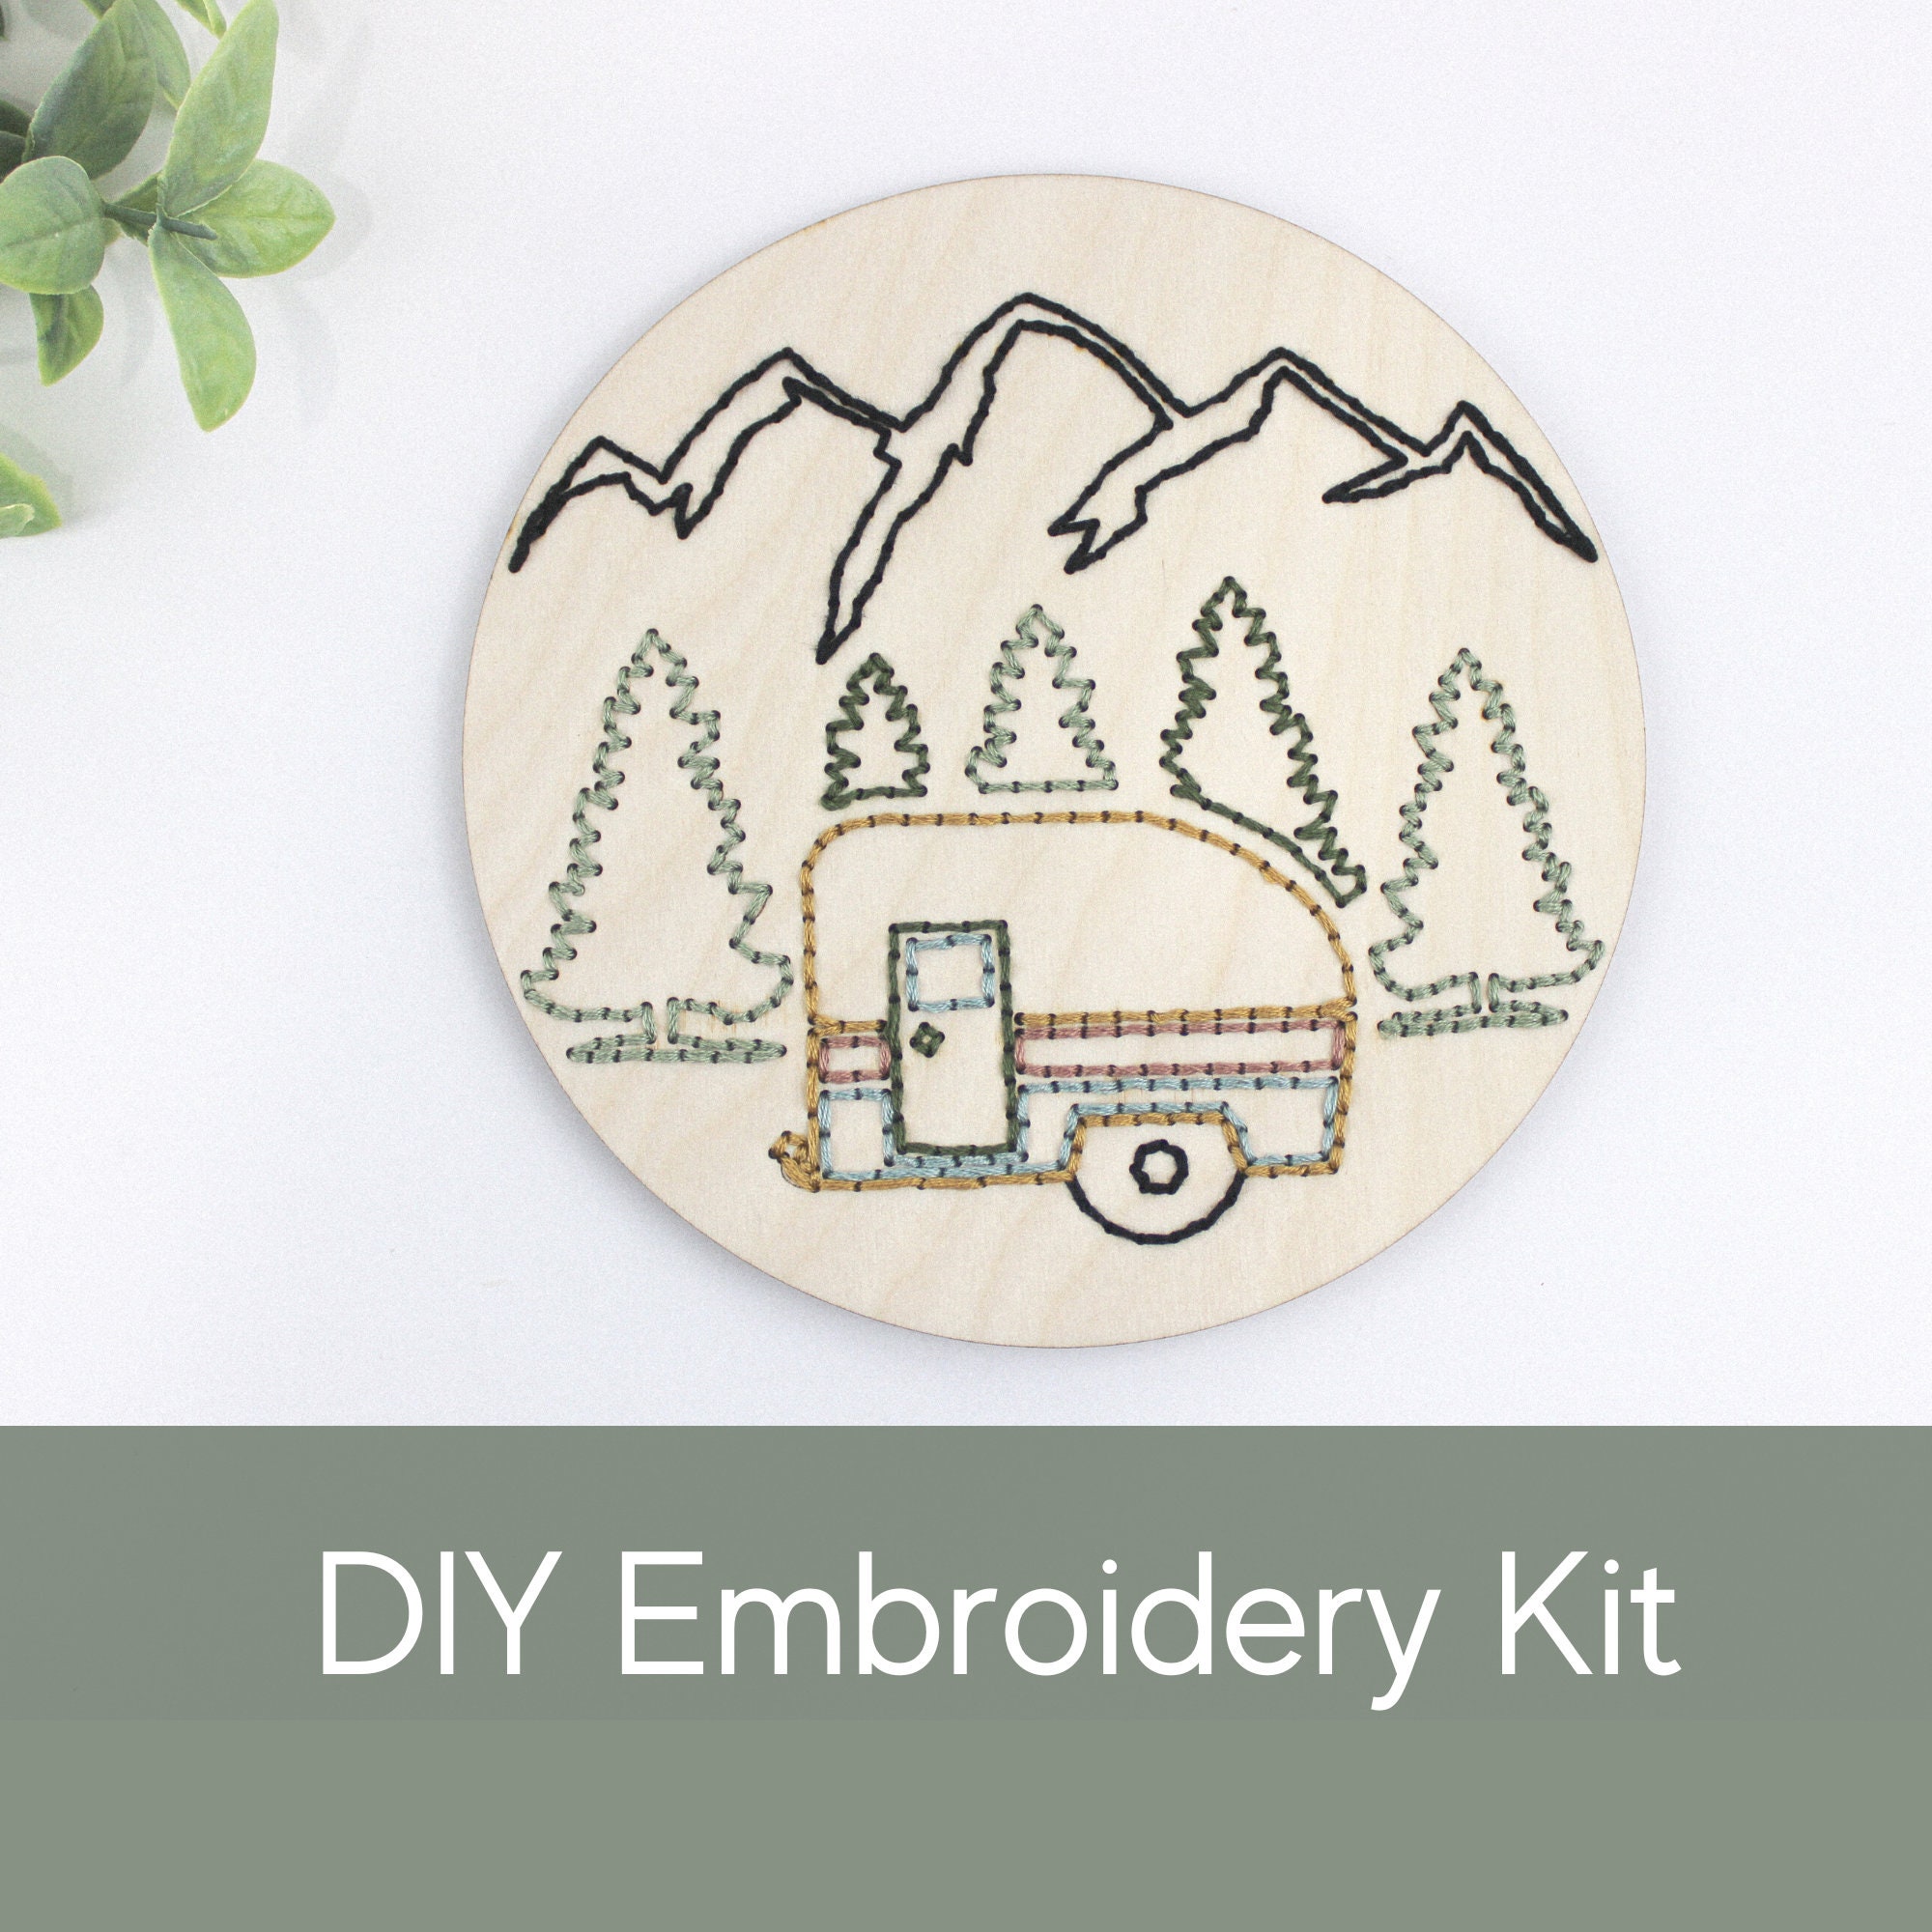 Modern Embroidery Kit for Beginners Wood, Illinois Gift, Illinois Decor,  State Gift, Home State Embroidery, Gifts Under 20, Lake House Decor 